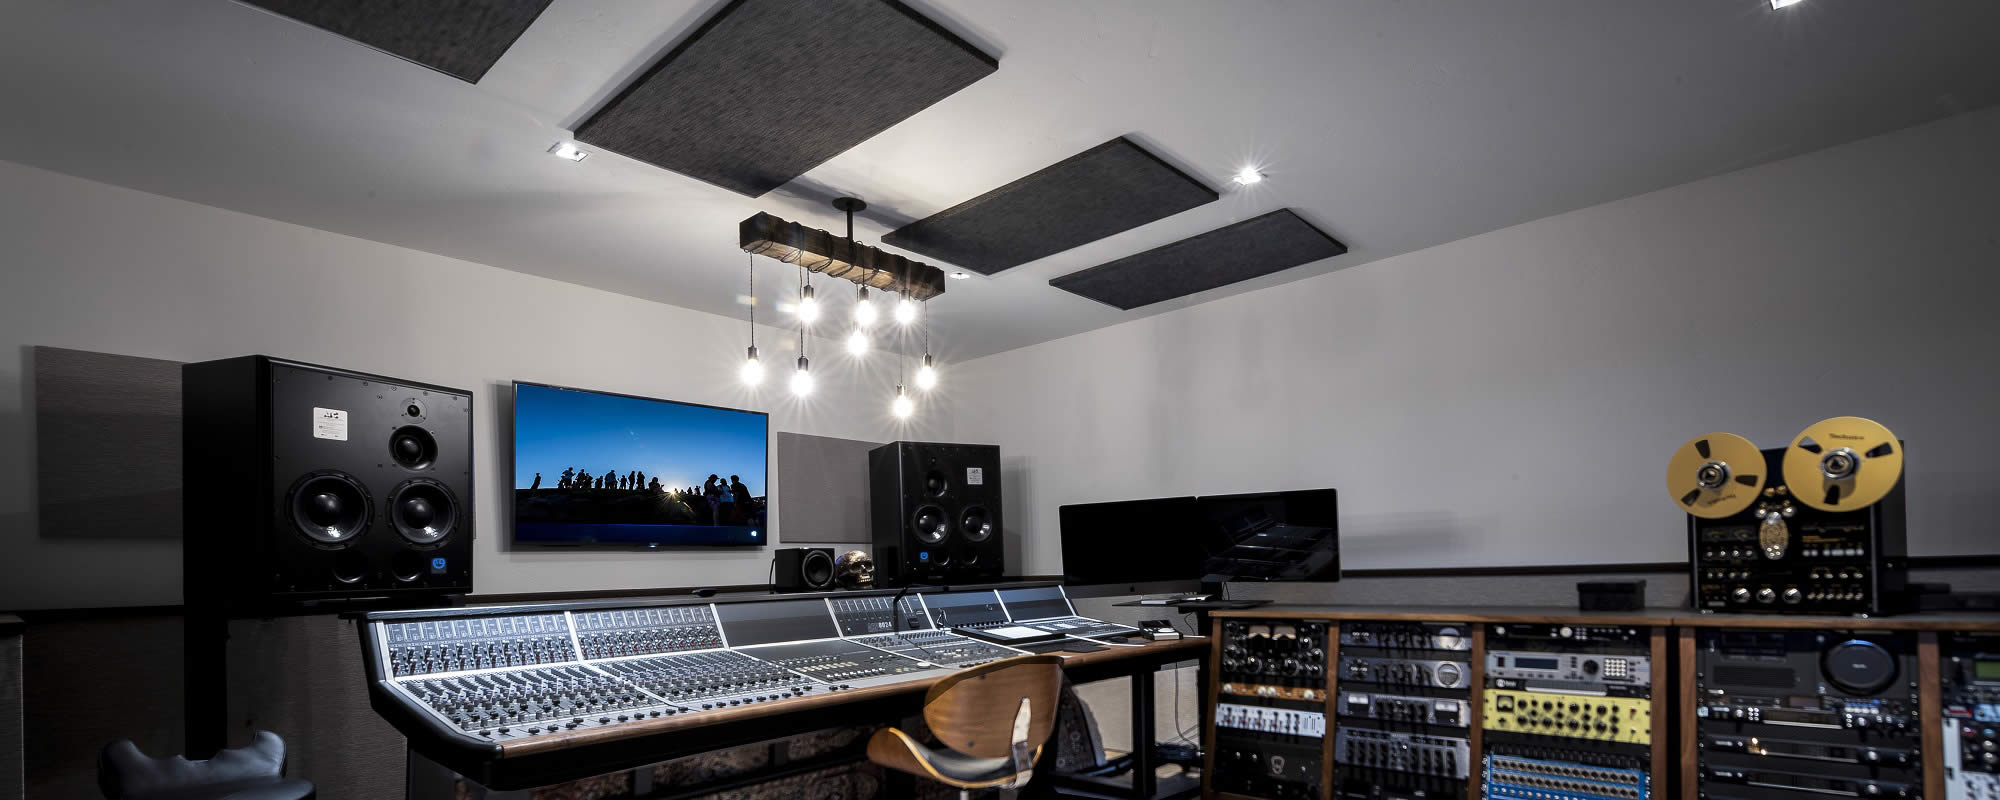 A/V system, acoustic panels, home automation